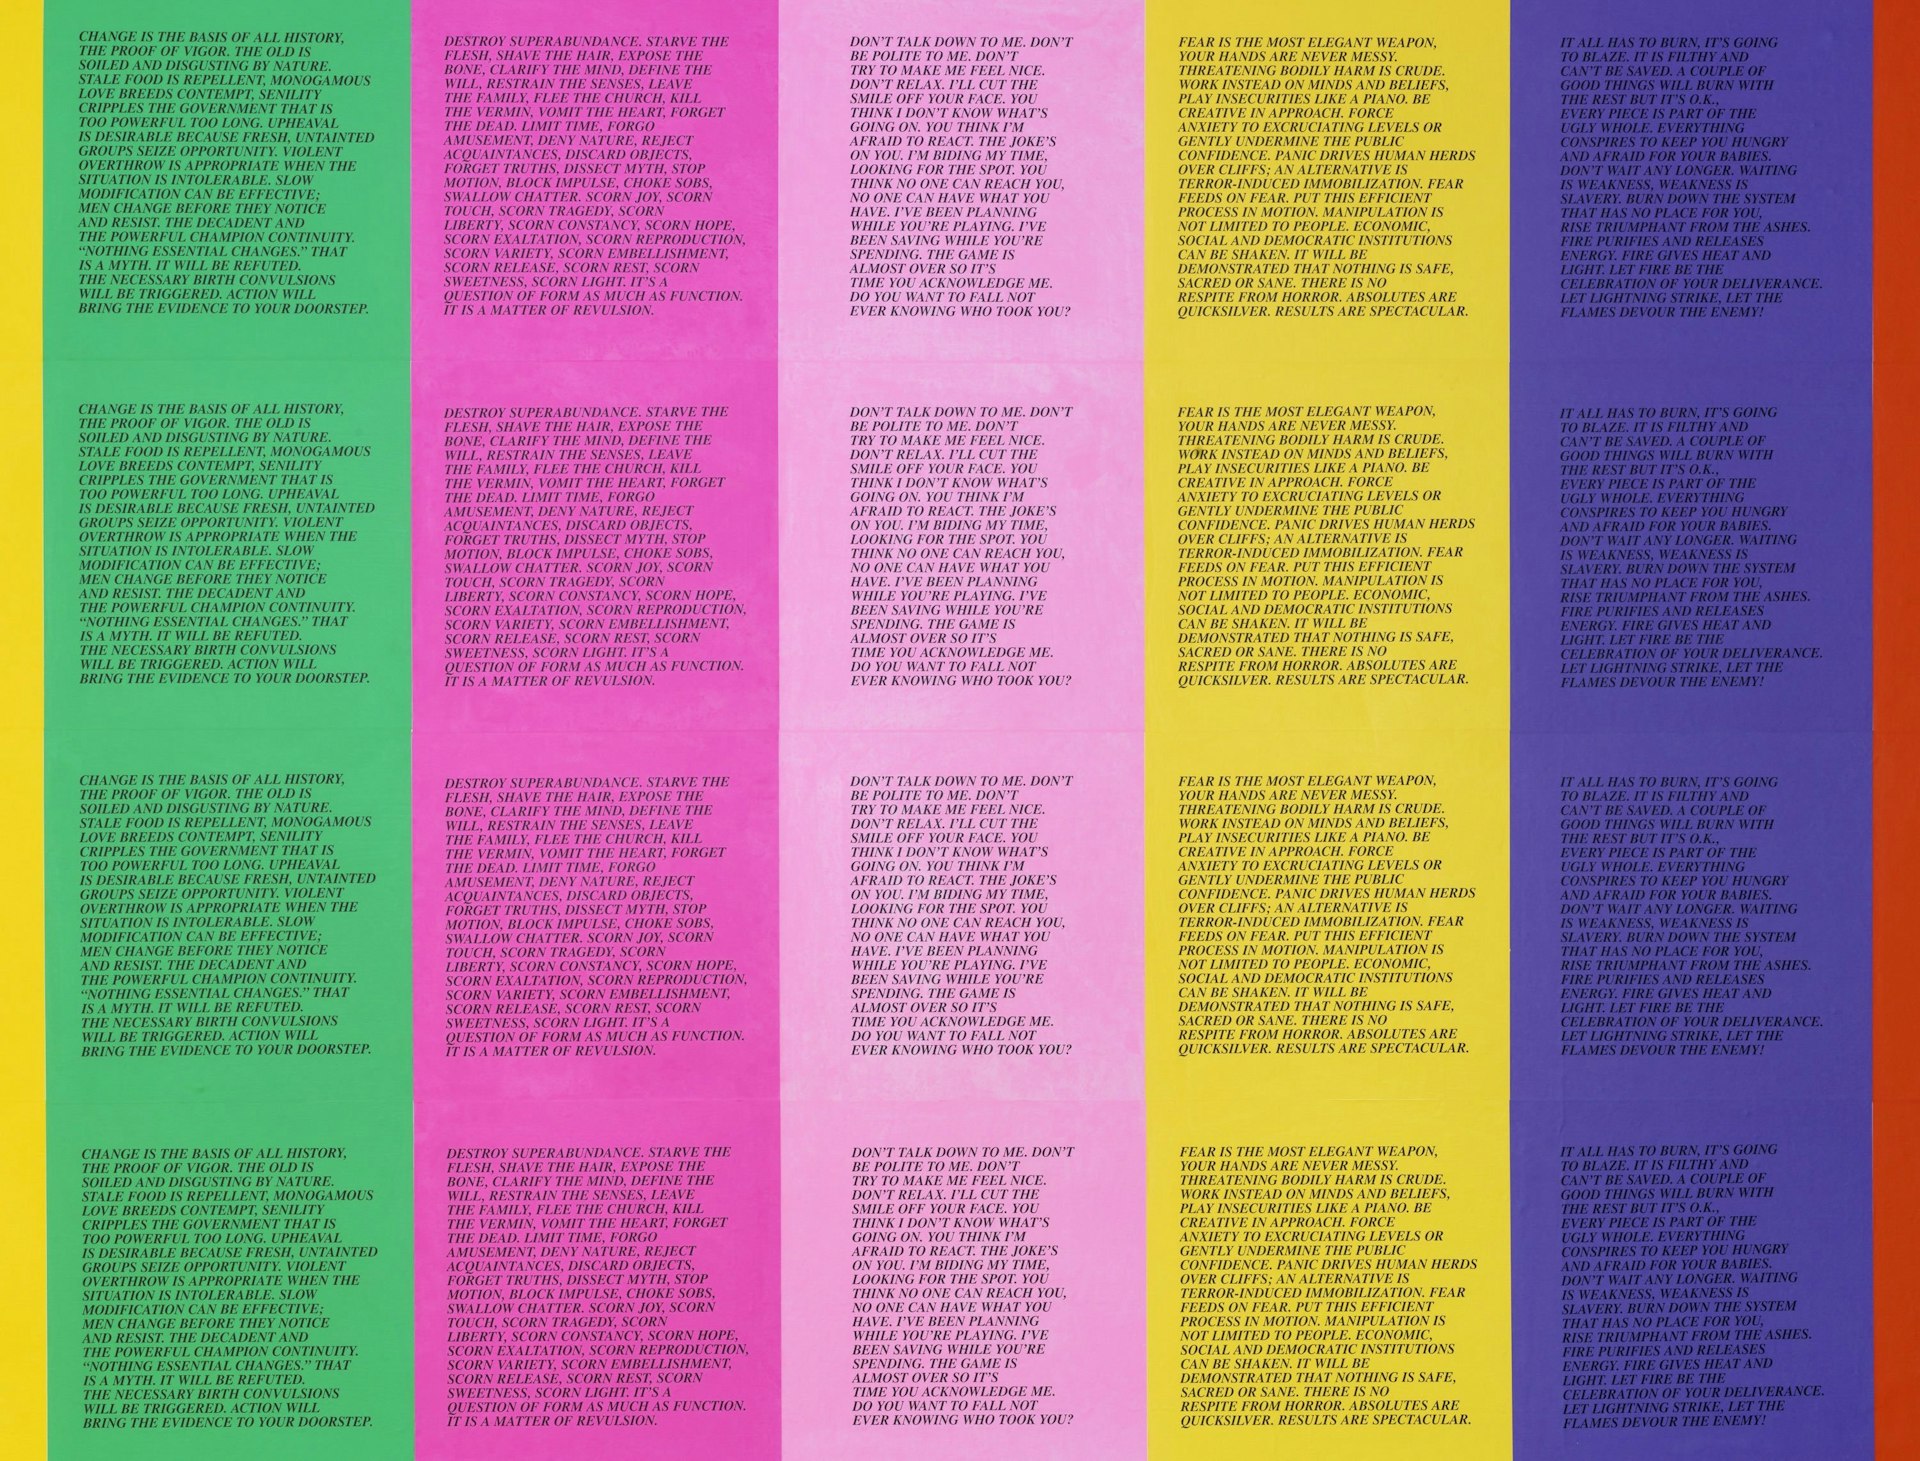 A new exhibition celebrates the radical power of text in art